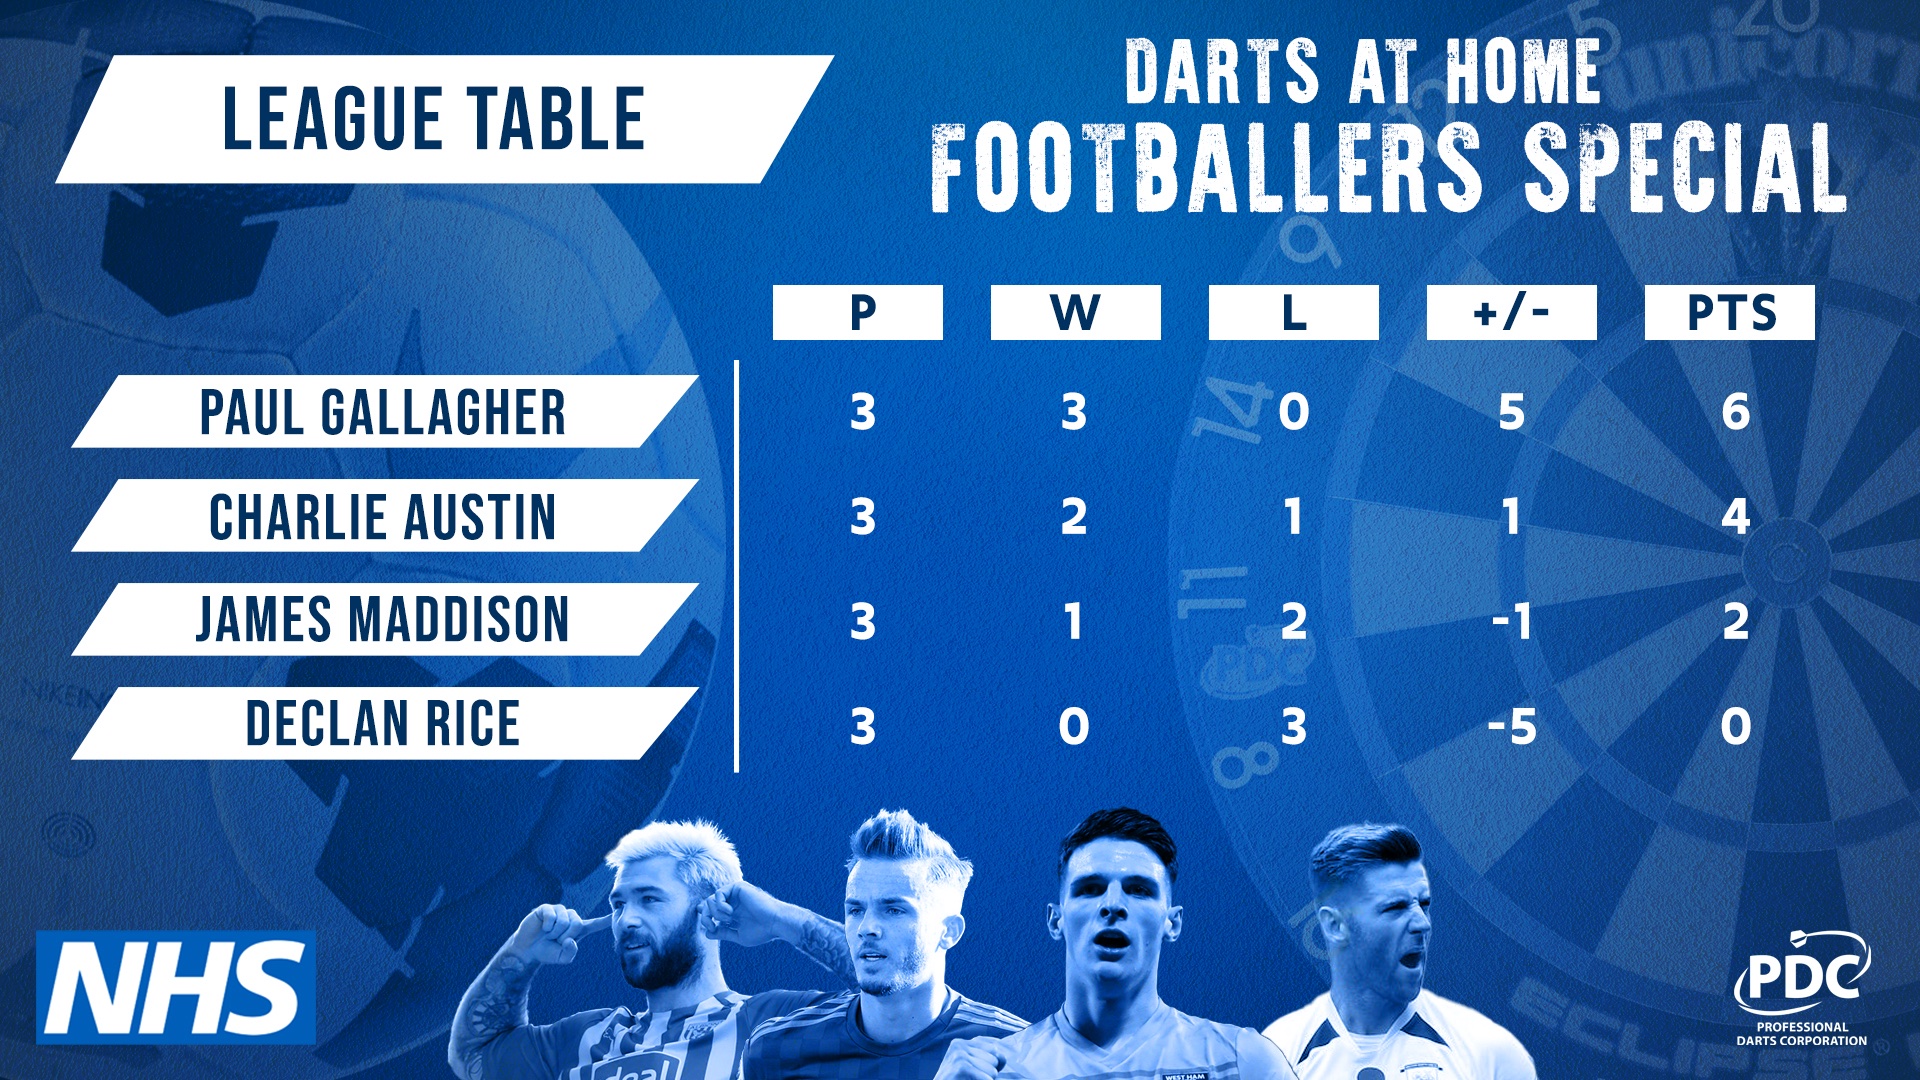 Darts At Home: Footballers Special table